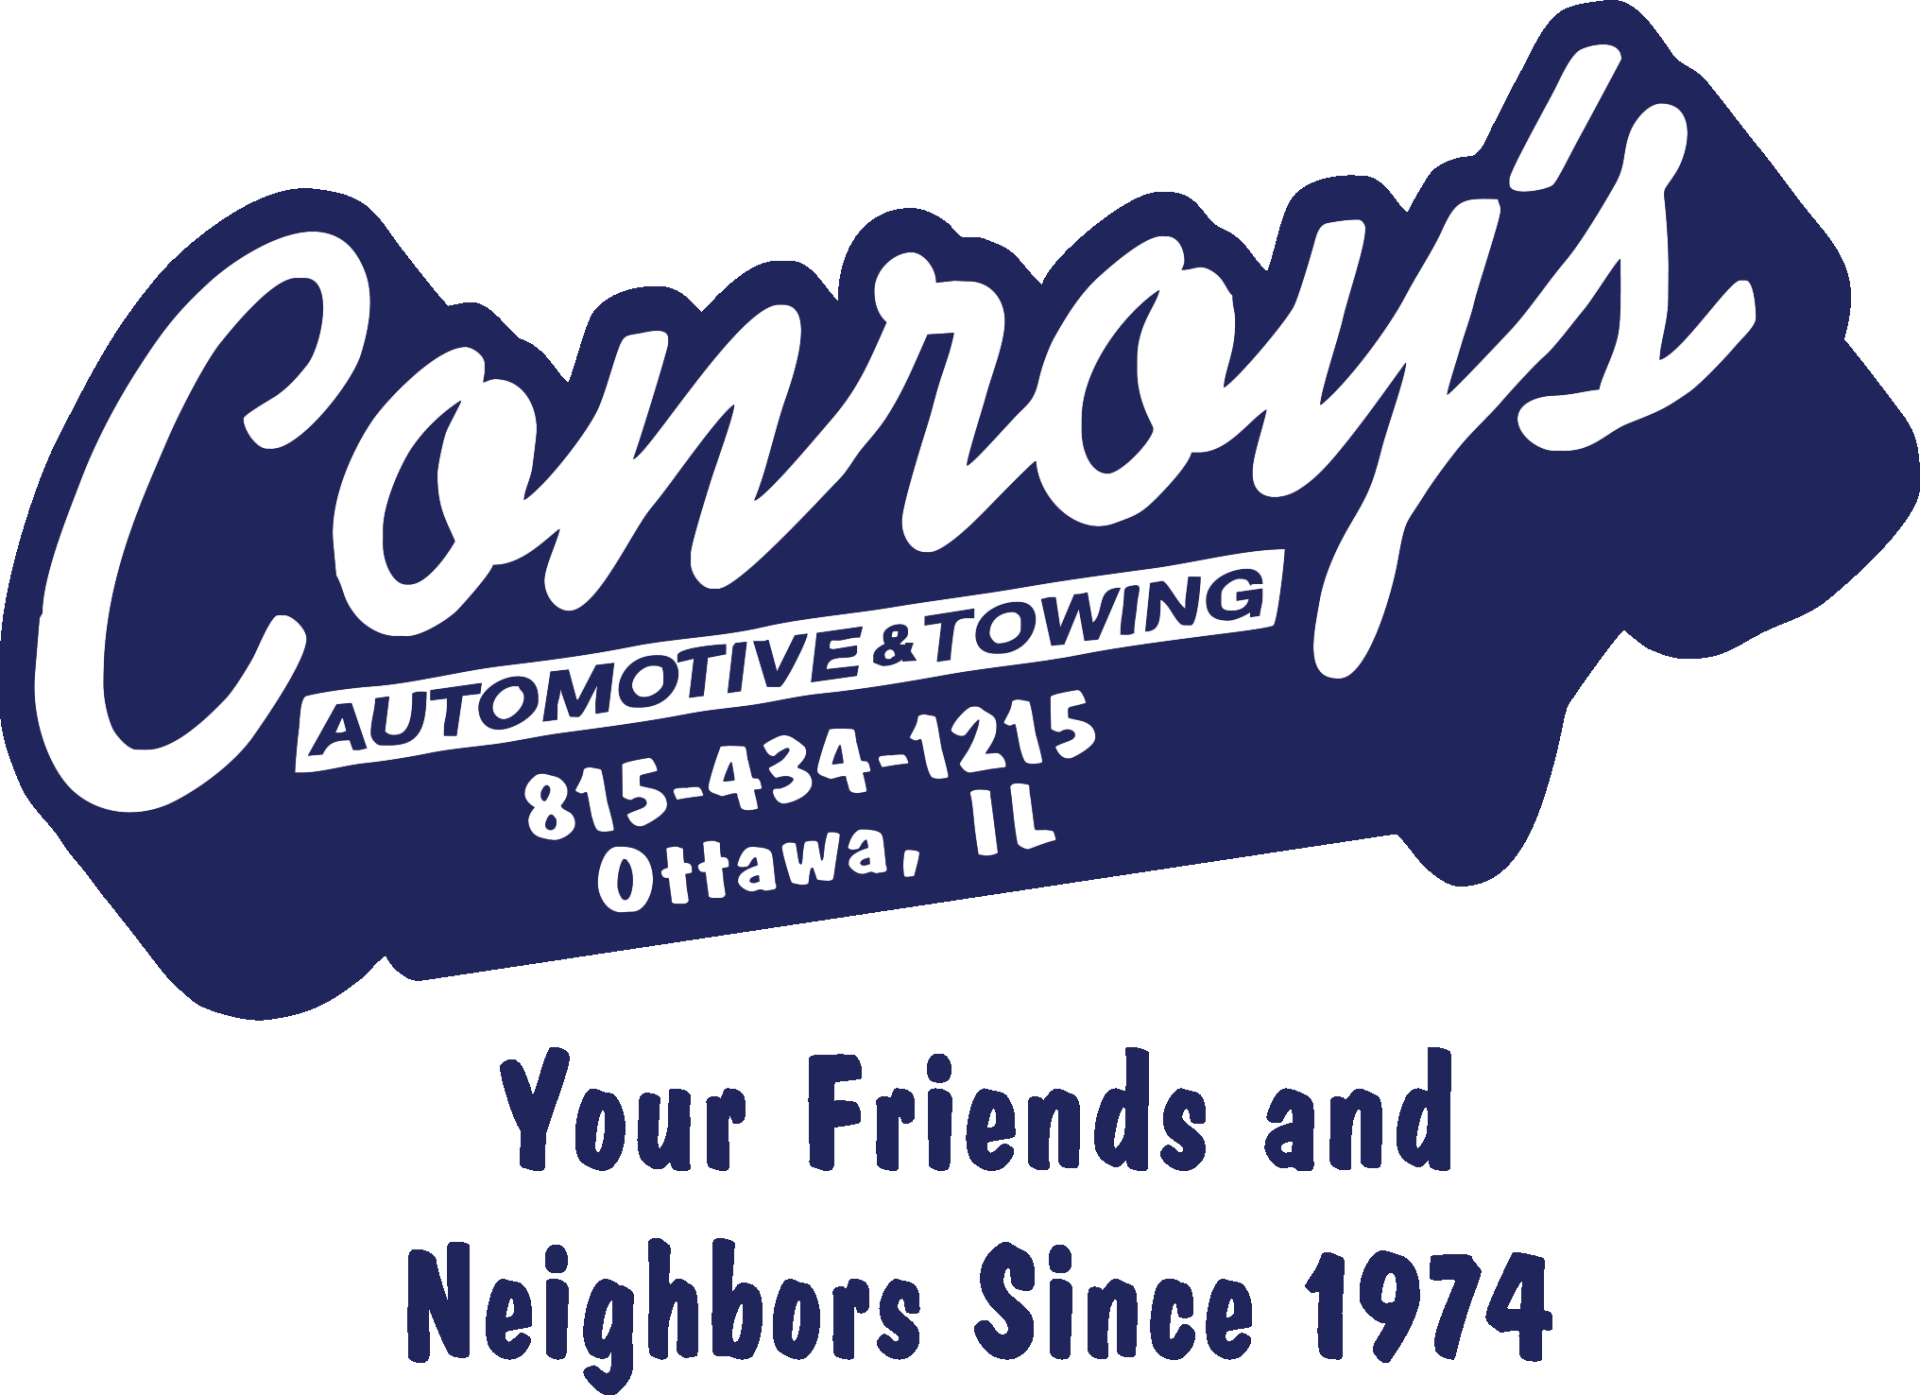 Conroy's Automotive & 24 Hour Towing in Ottawa, IL